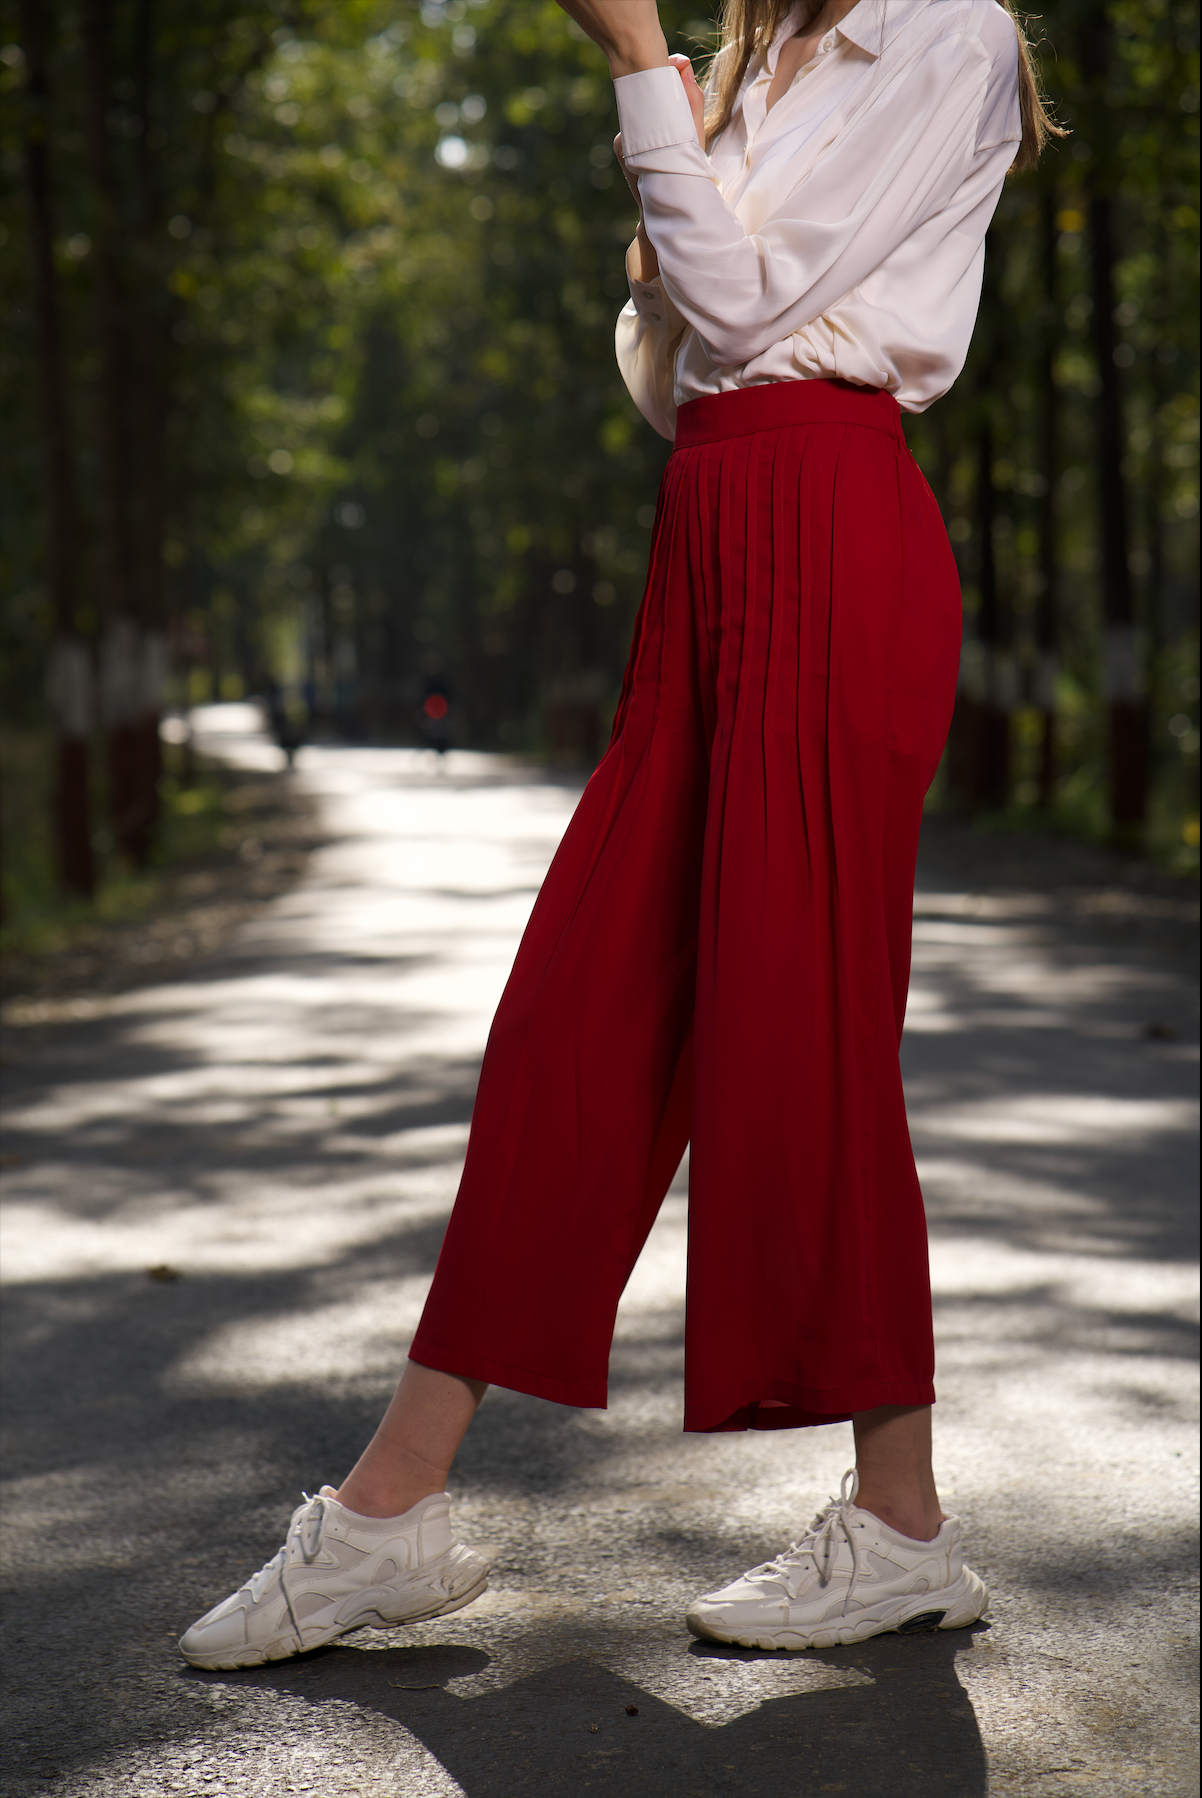 The Daleigh | Fashion, Palazzo pants, Casual summer wear